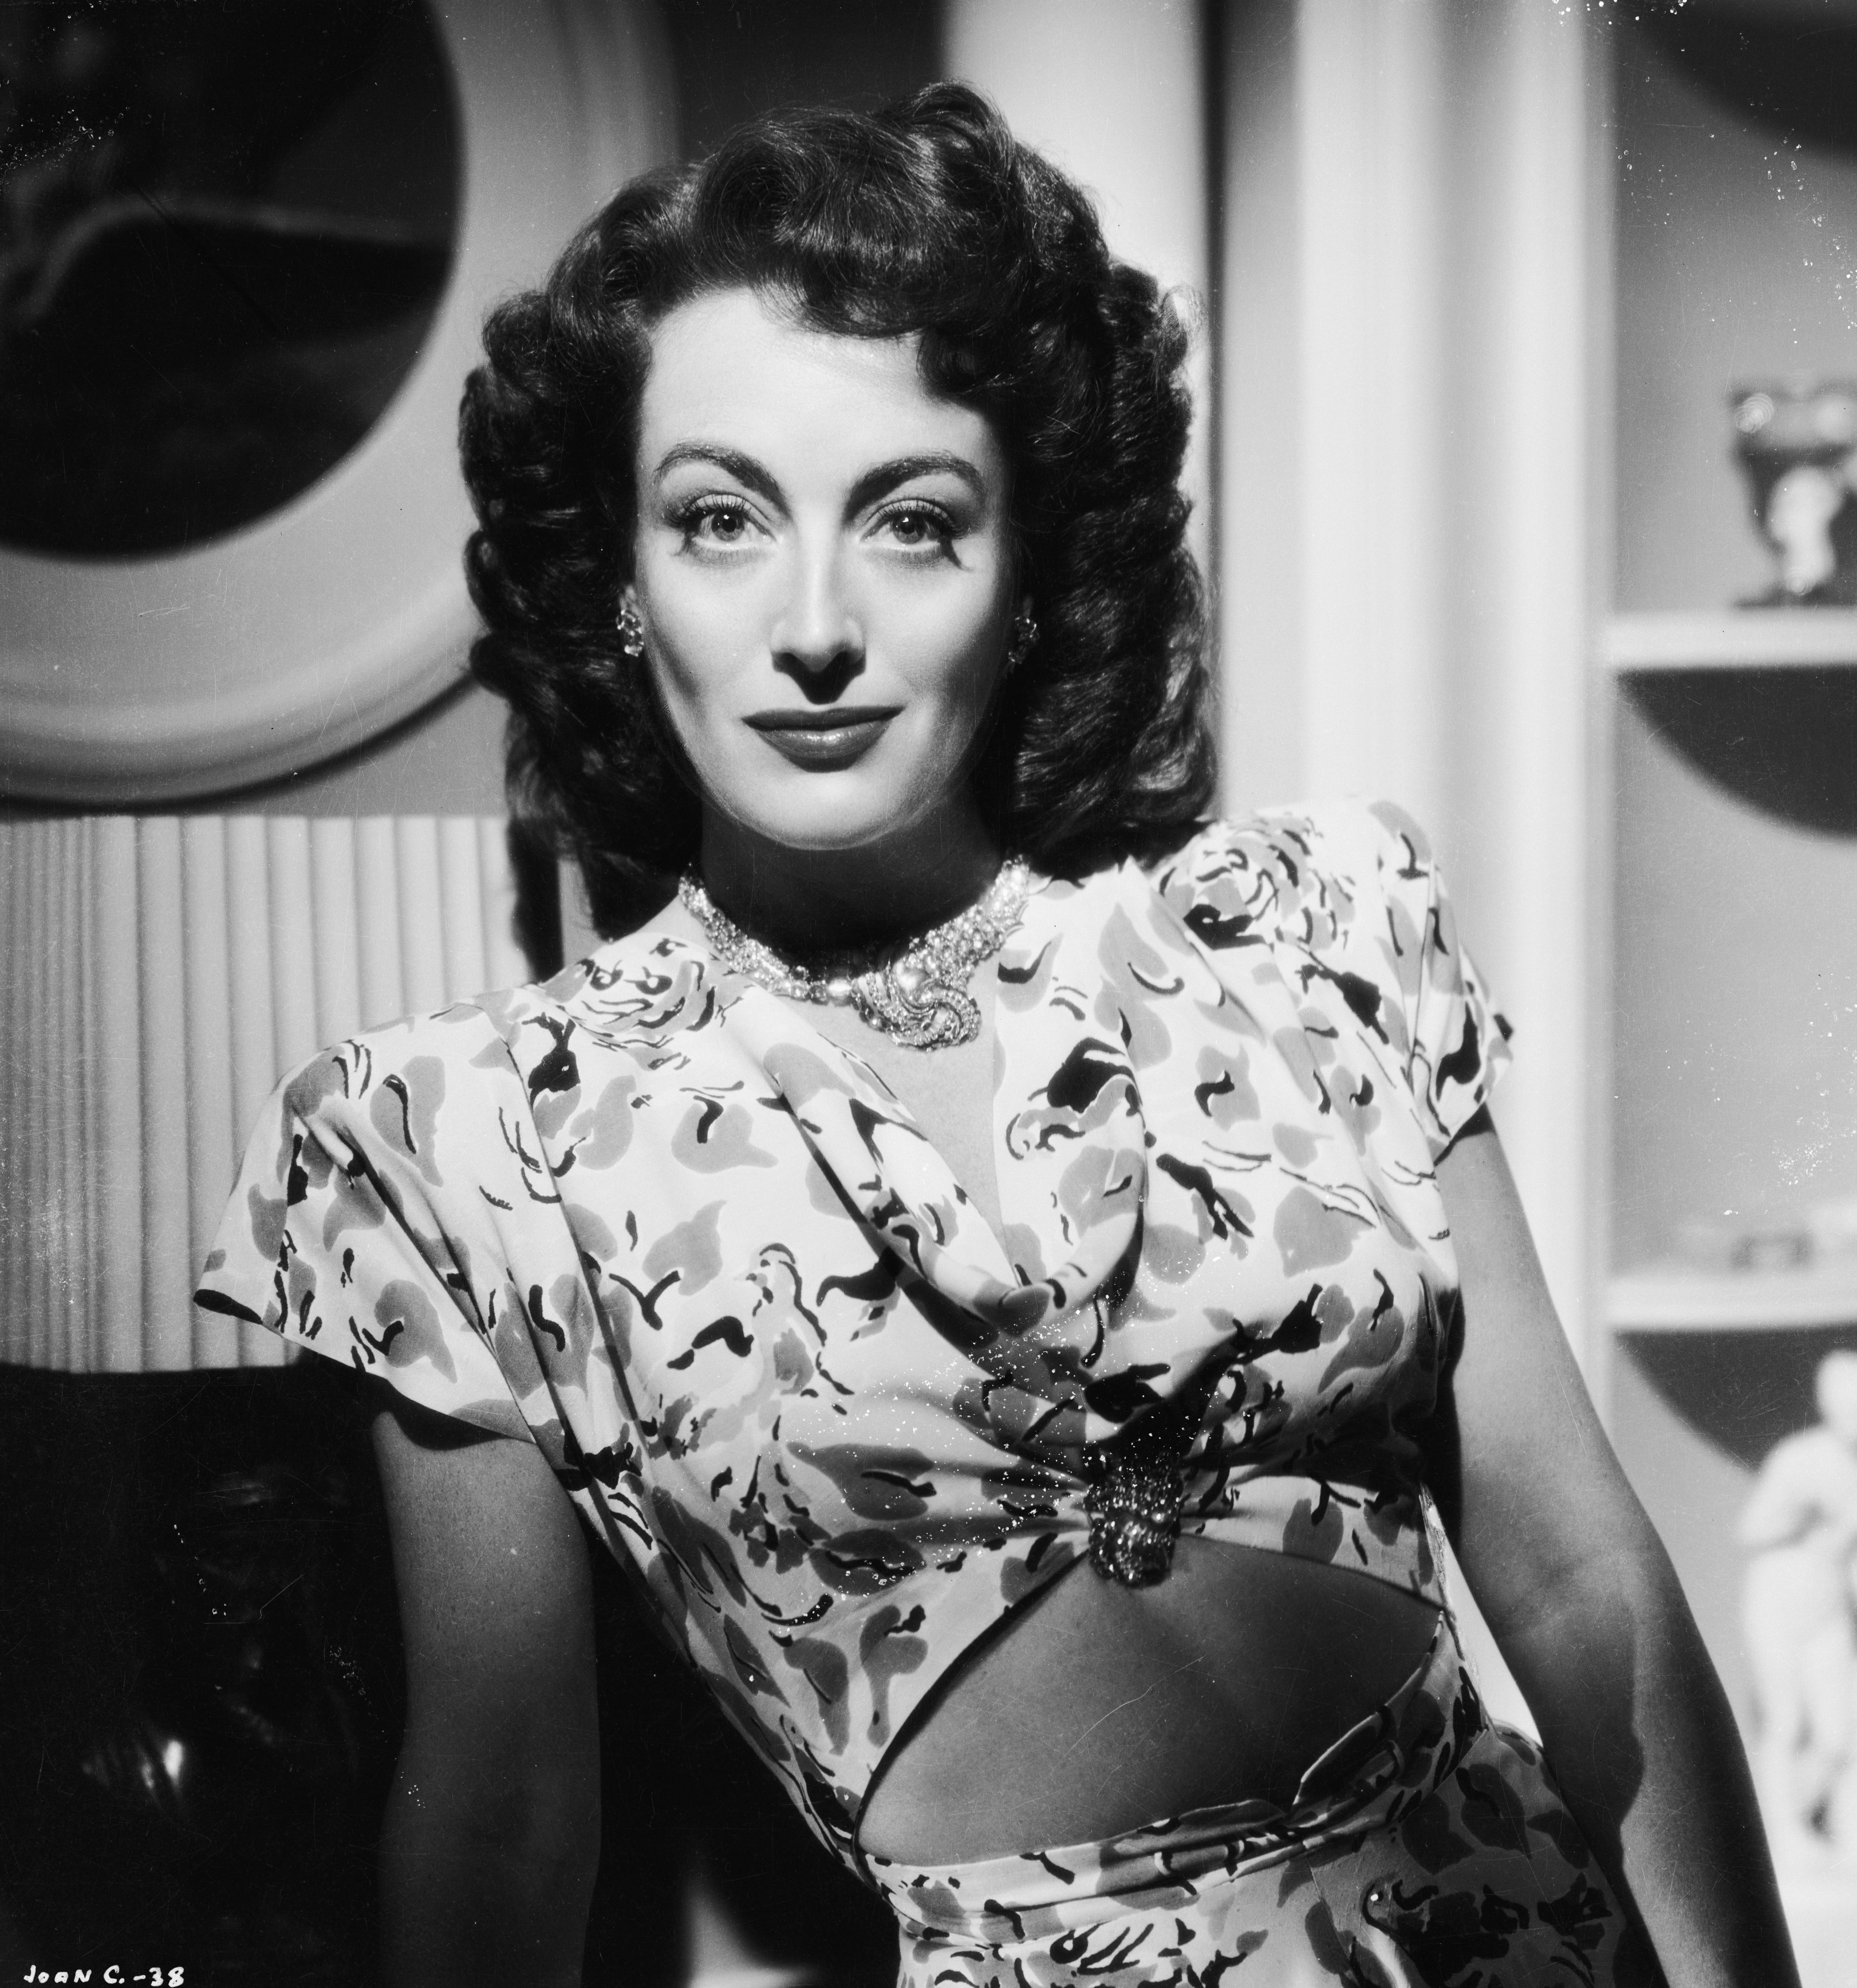  American film actress Joan Crawford (1908 - 1977) in her  starring role in 'Mildred Pierce', circa 1944:| Source: Getty Images